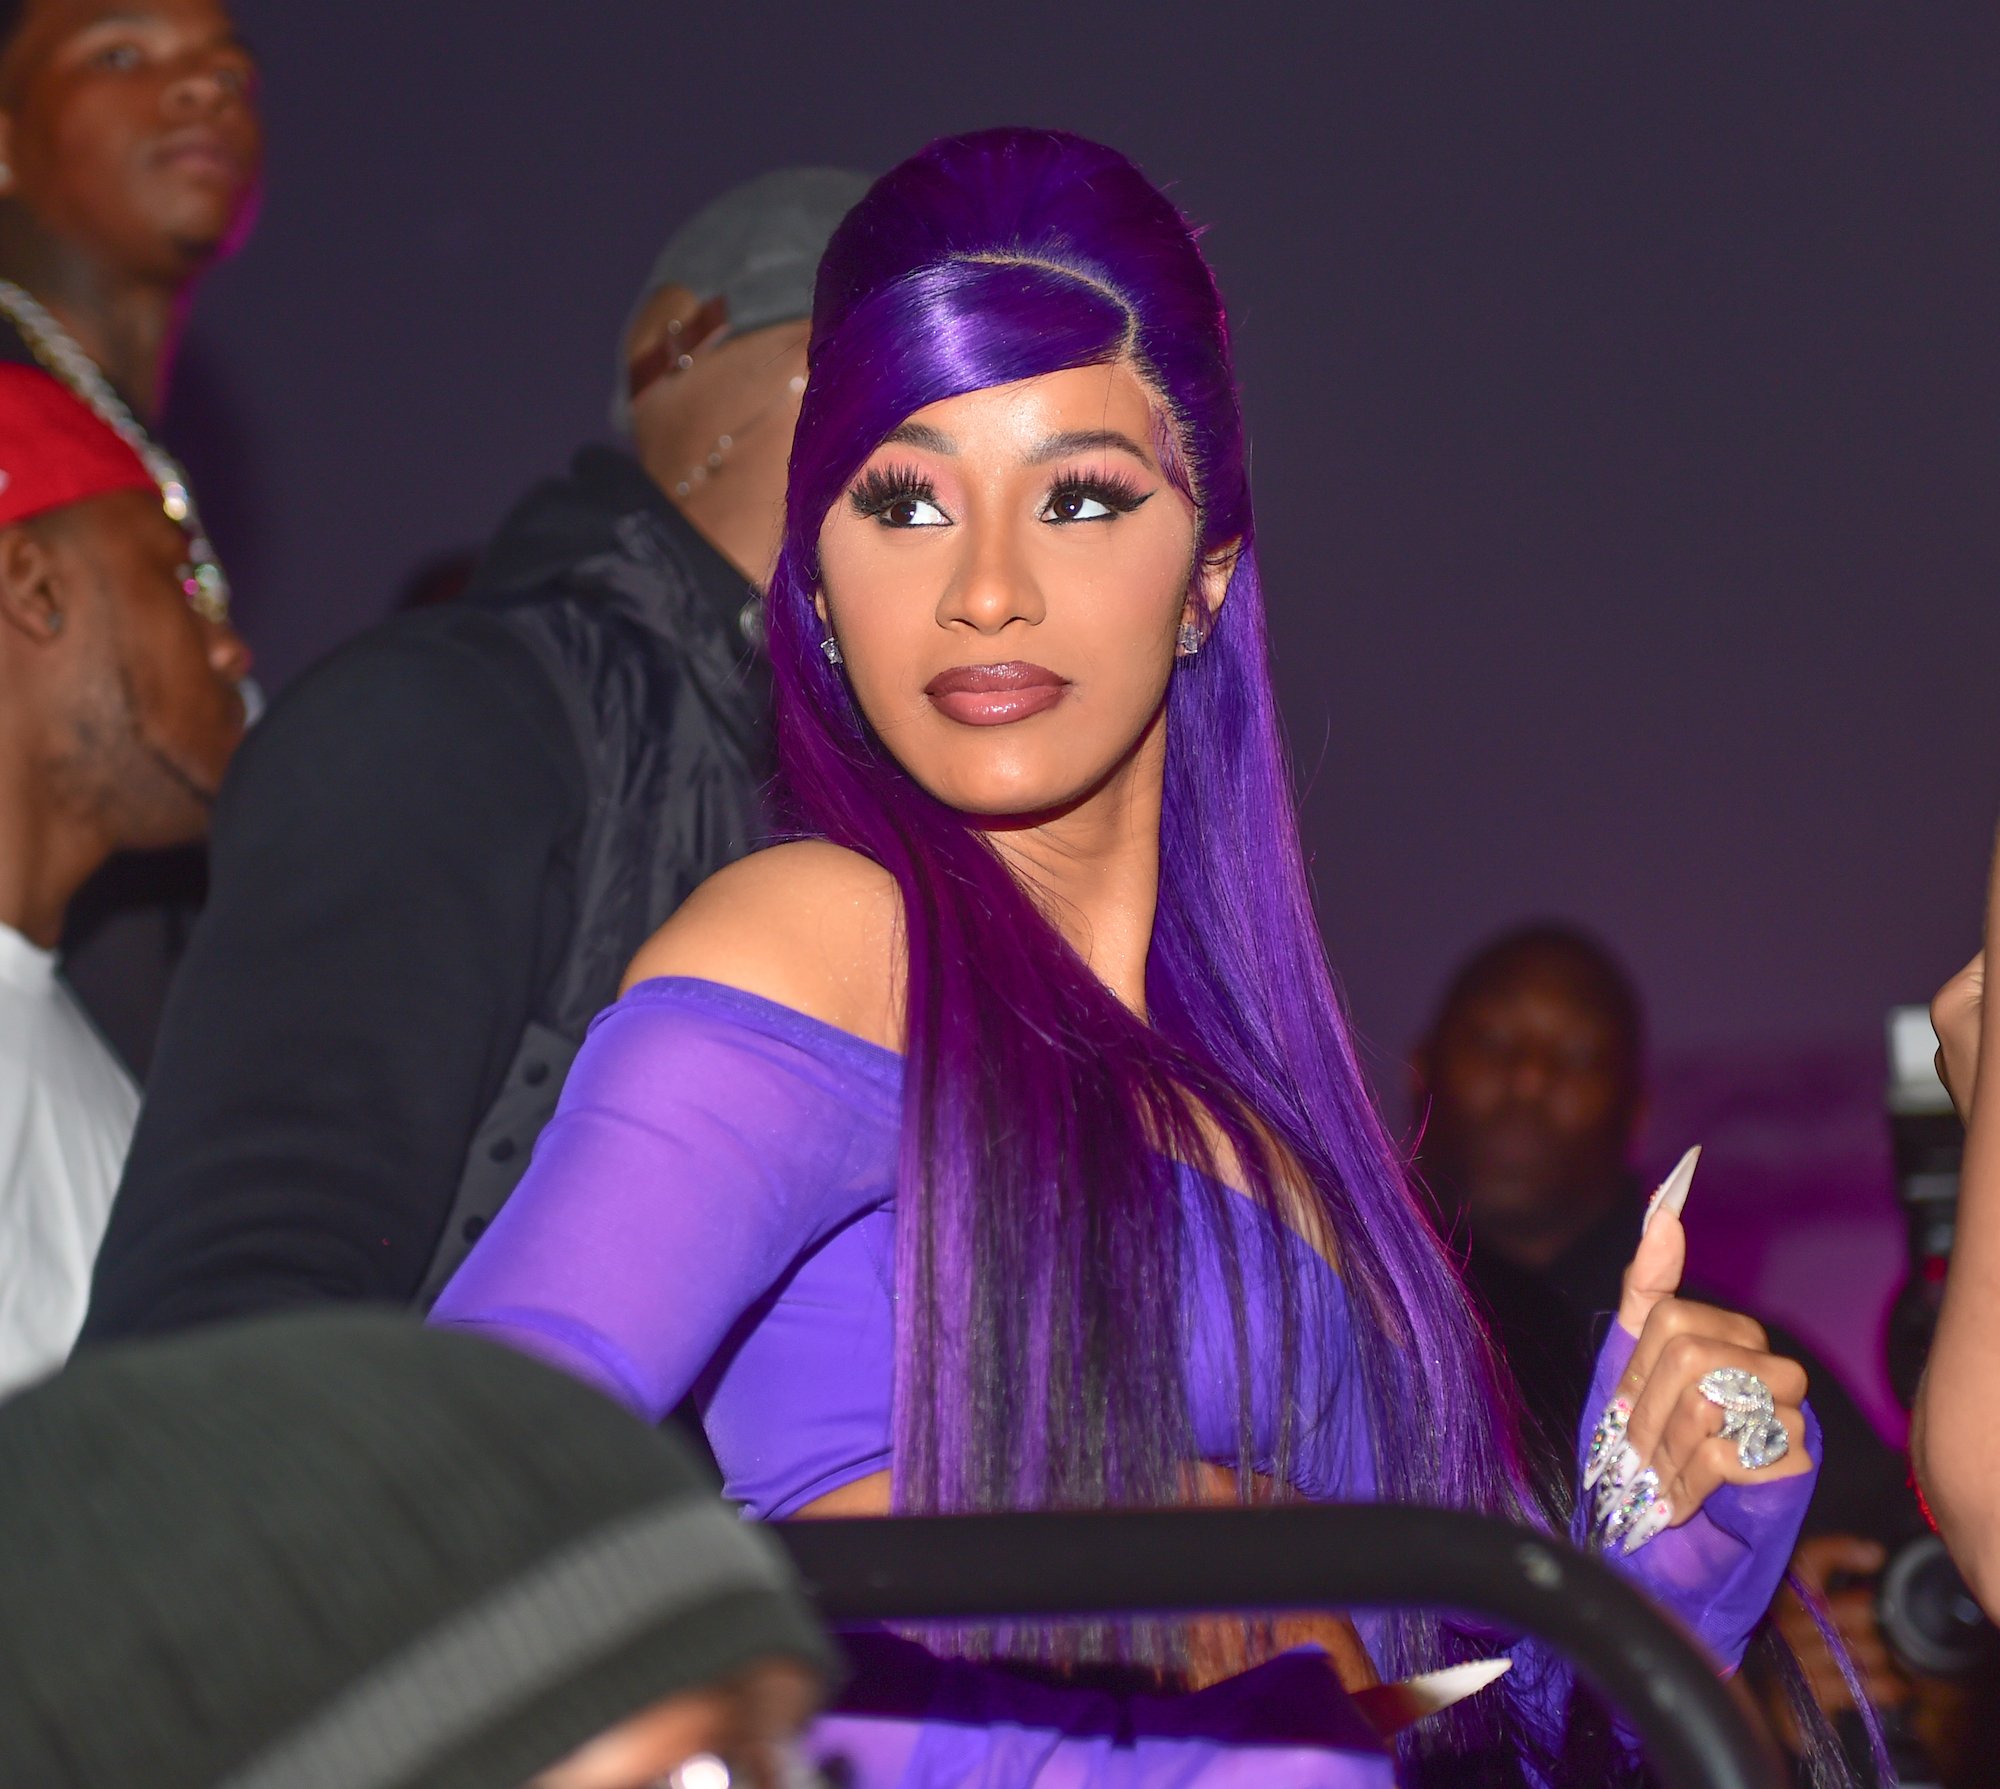 Fans Are Convinced Cardi B Is Pregnant After She Shares Photo of